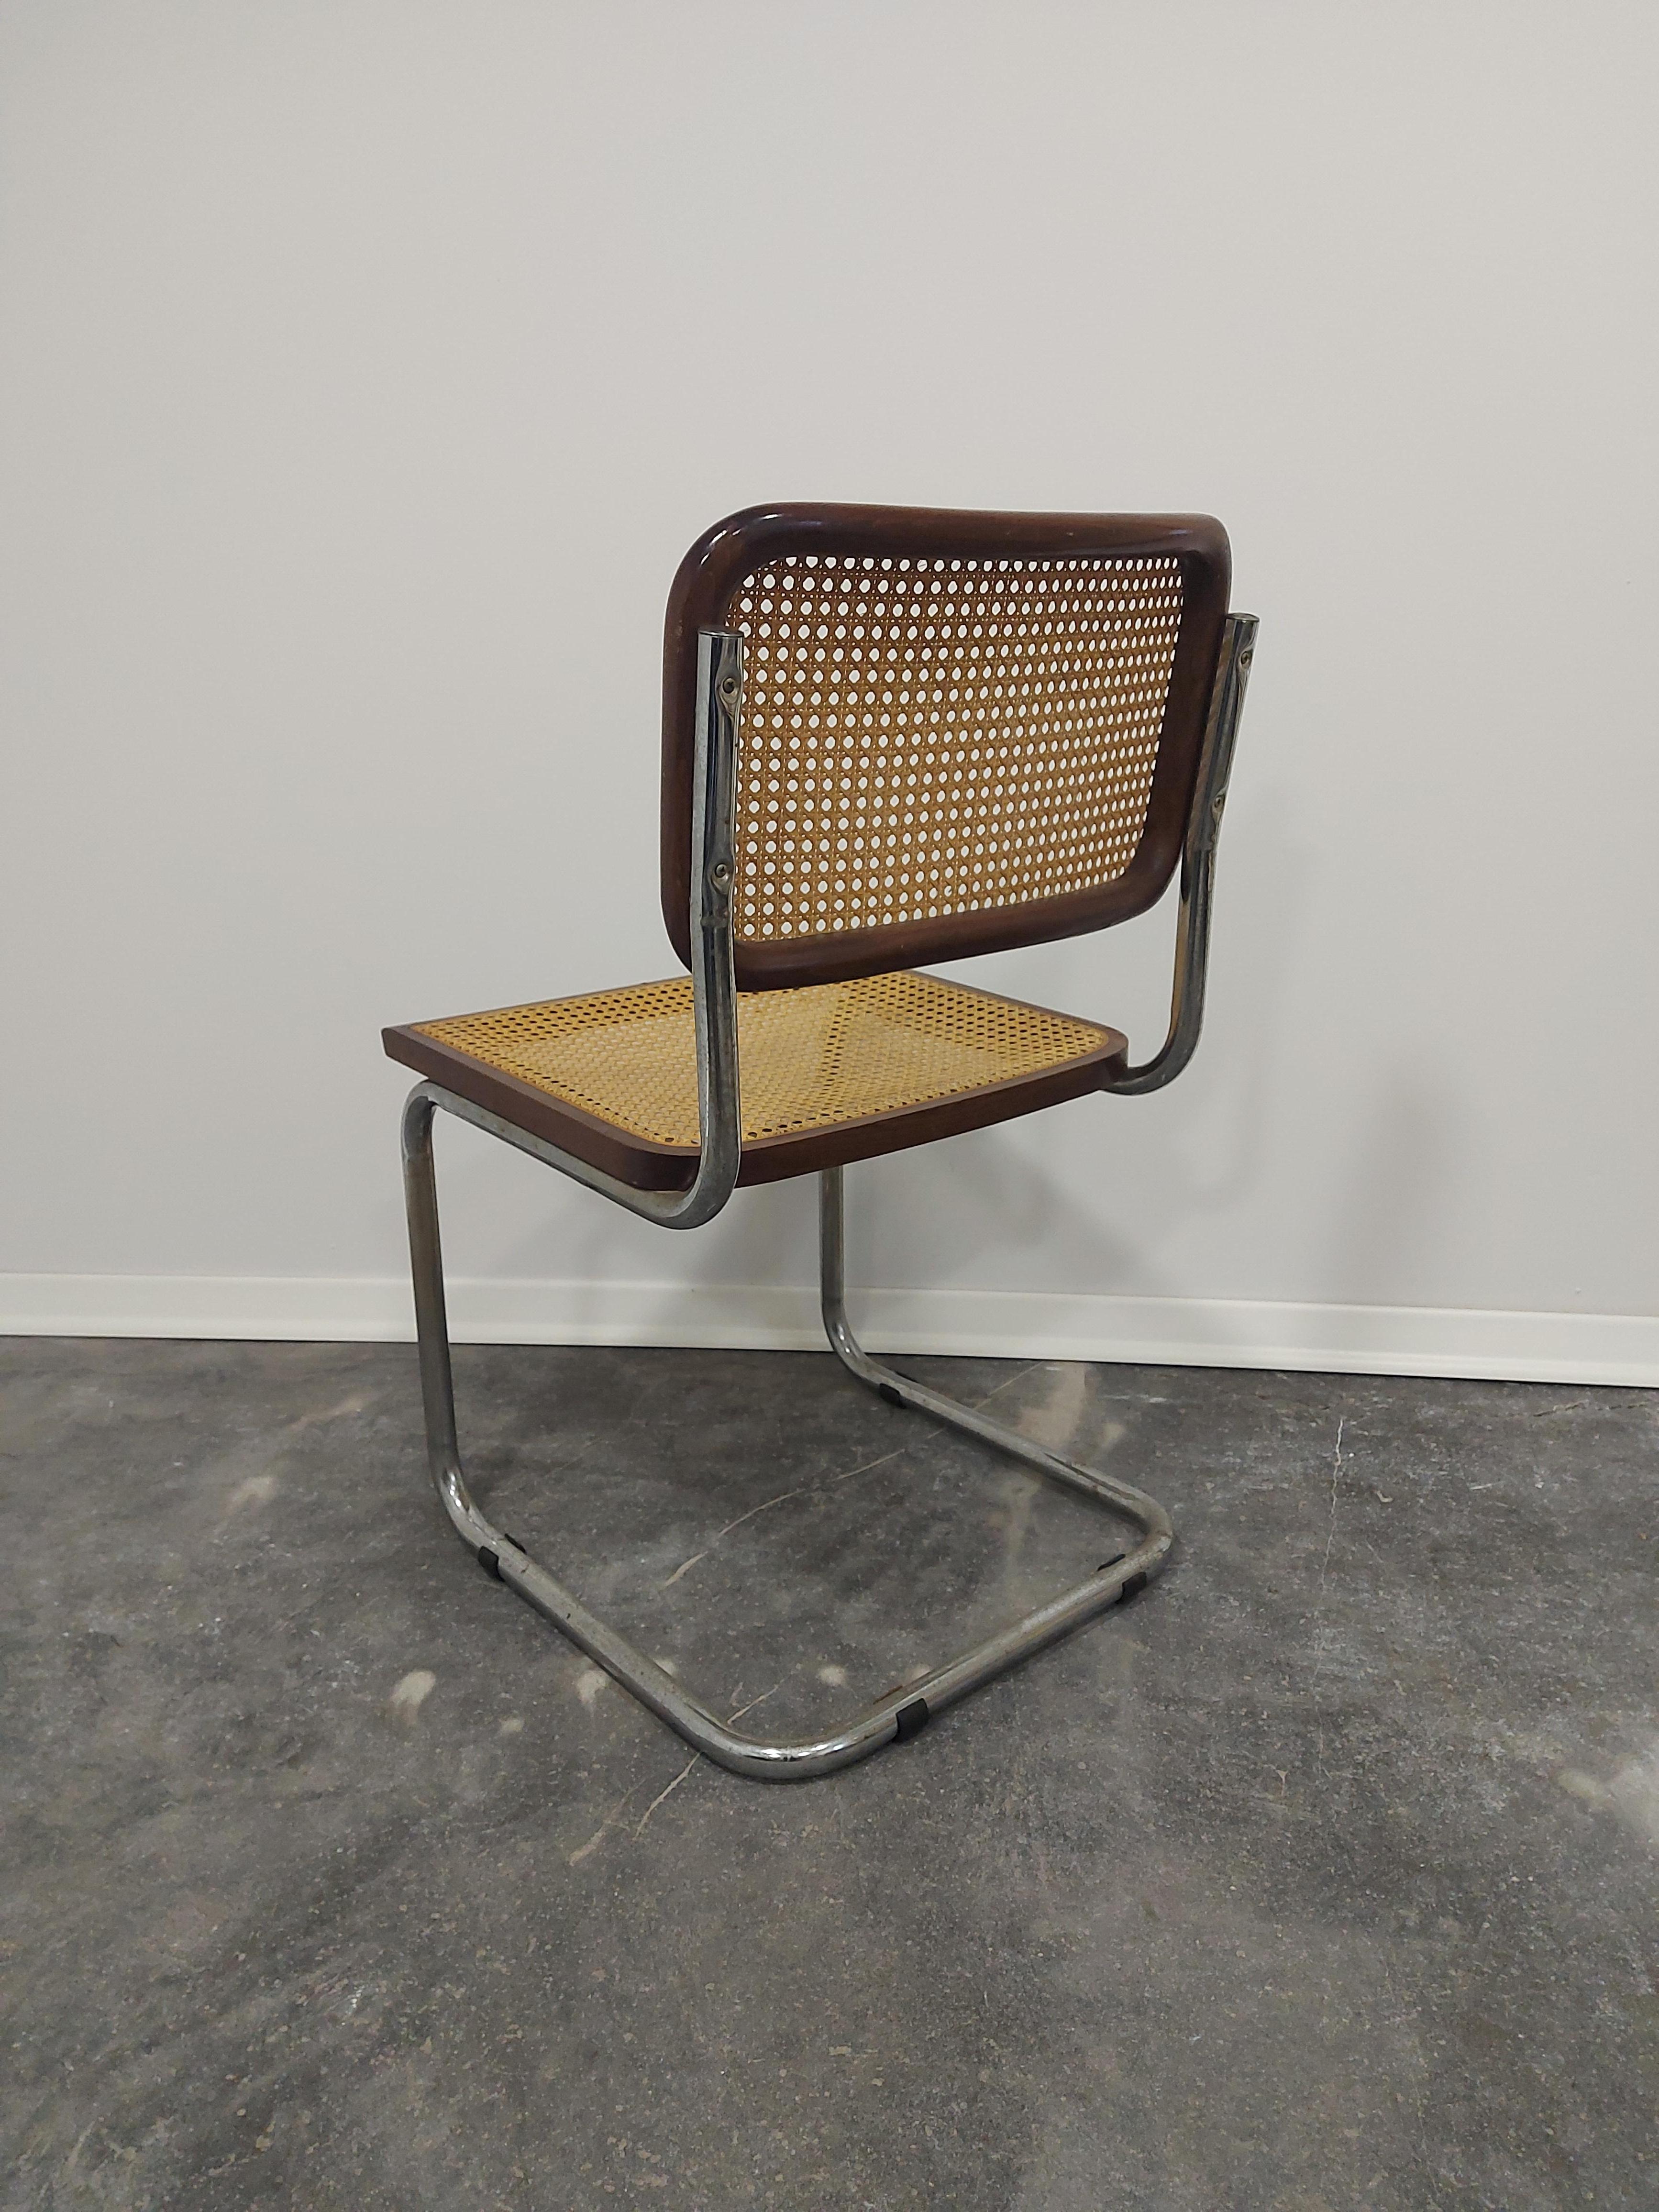 Cesca Chair by Marcel Breuer 1970s B32 1 of 5 For Sale 5